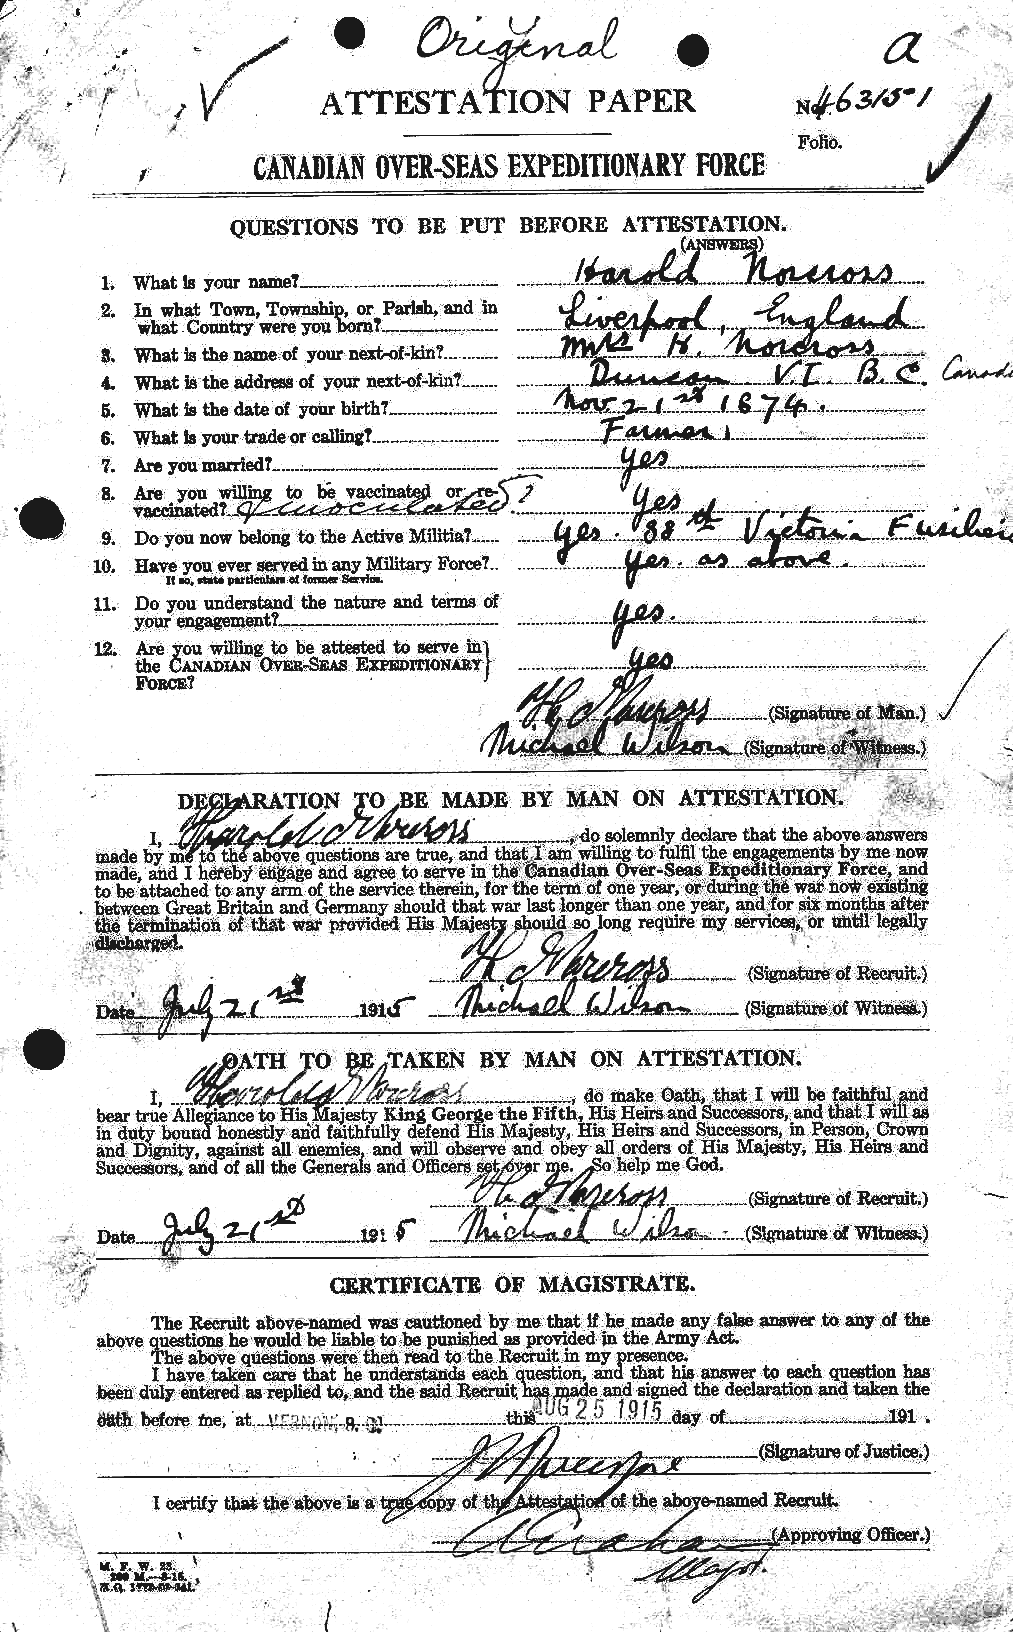 Personnel Records of the First World War - CEF 550189a